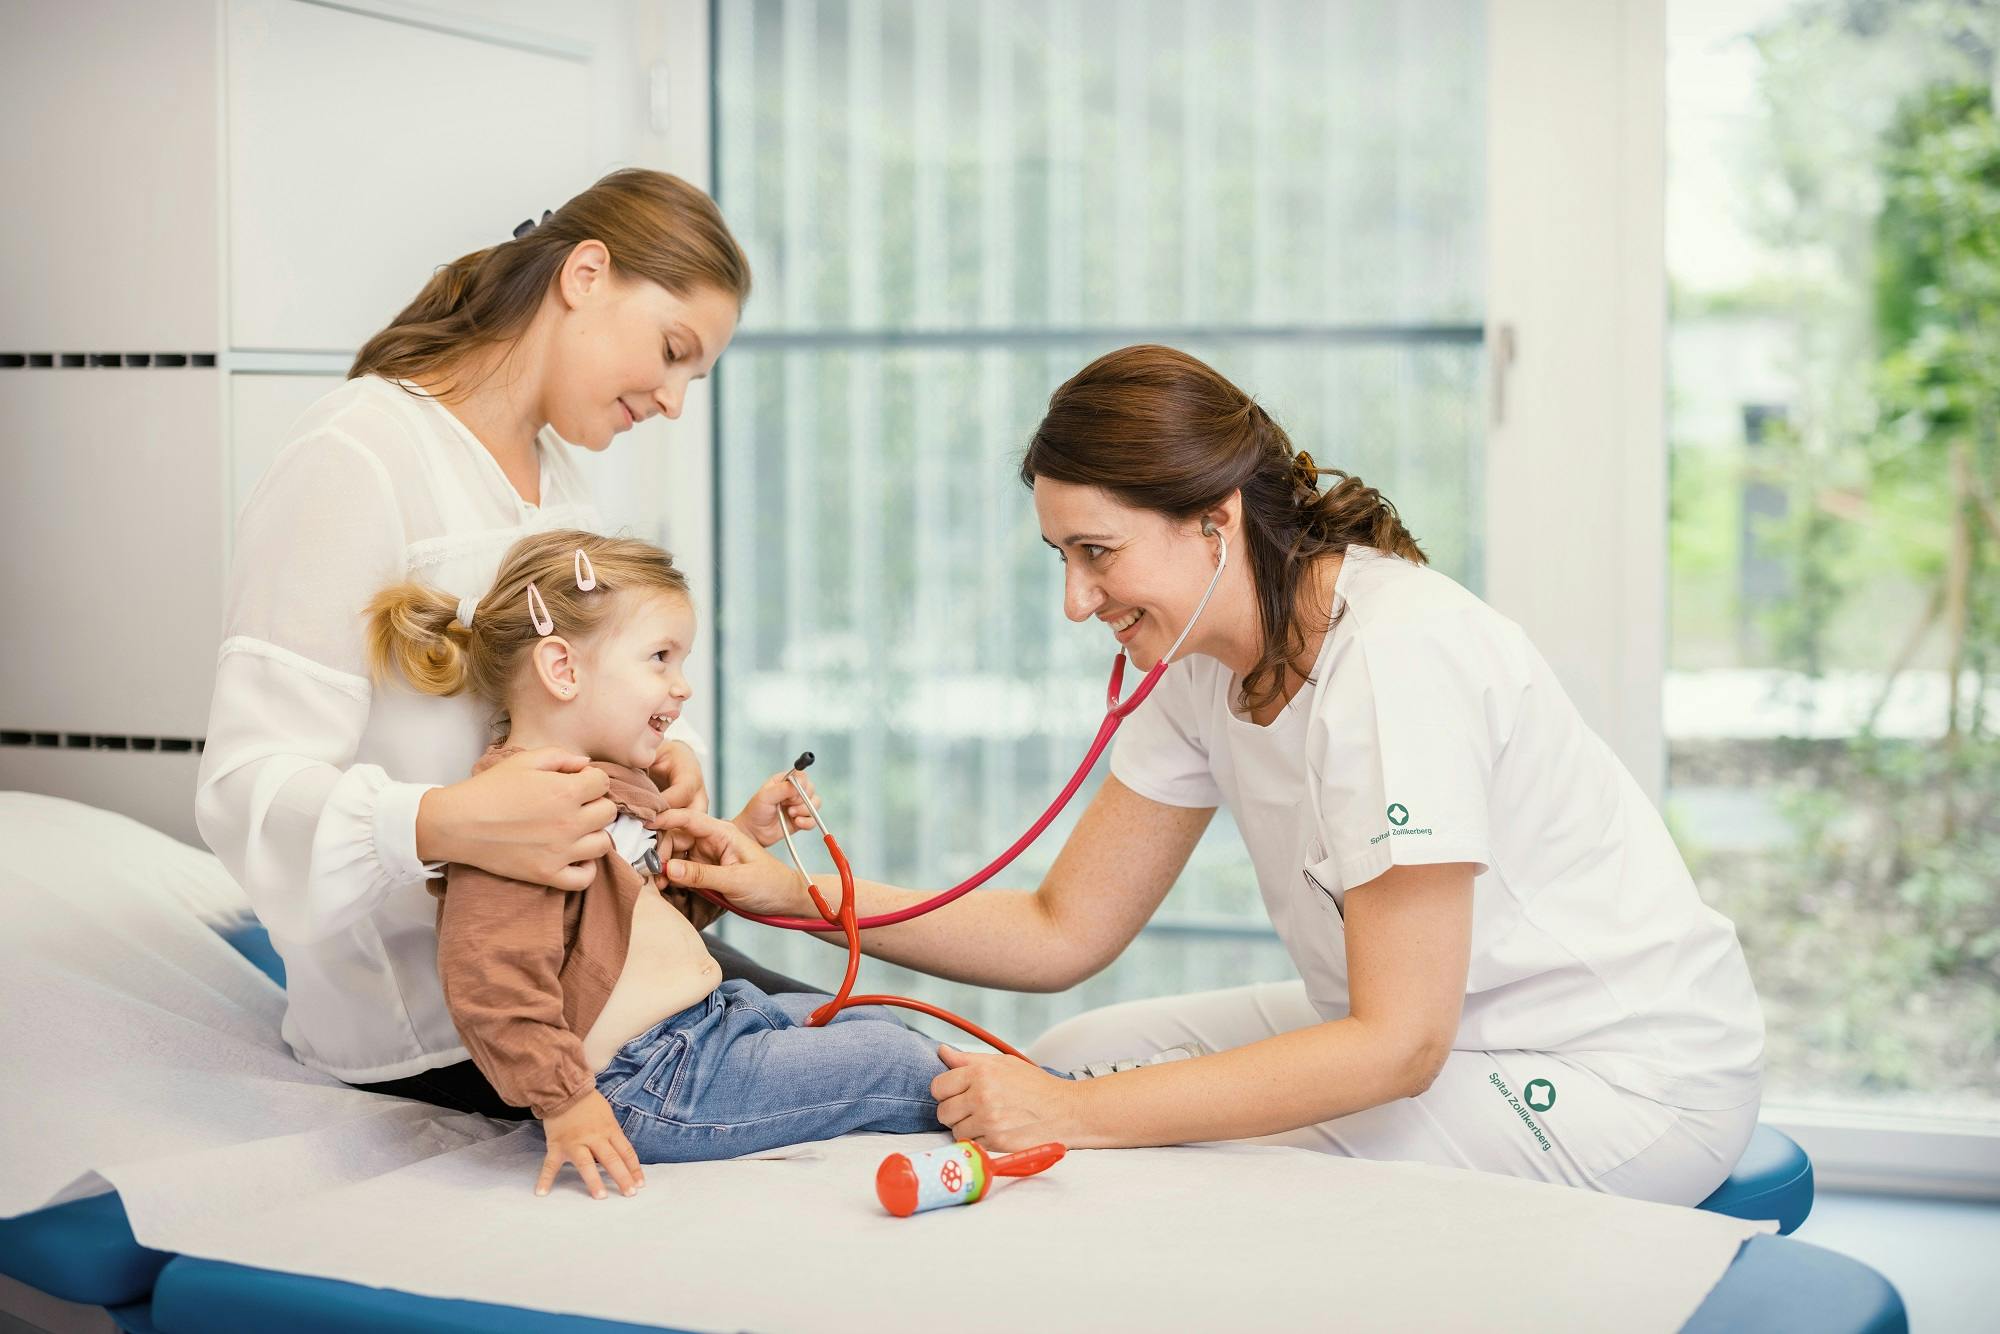 Paediatrician examining smiling girl with stethoscope, mother supporting her.